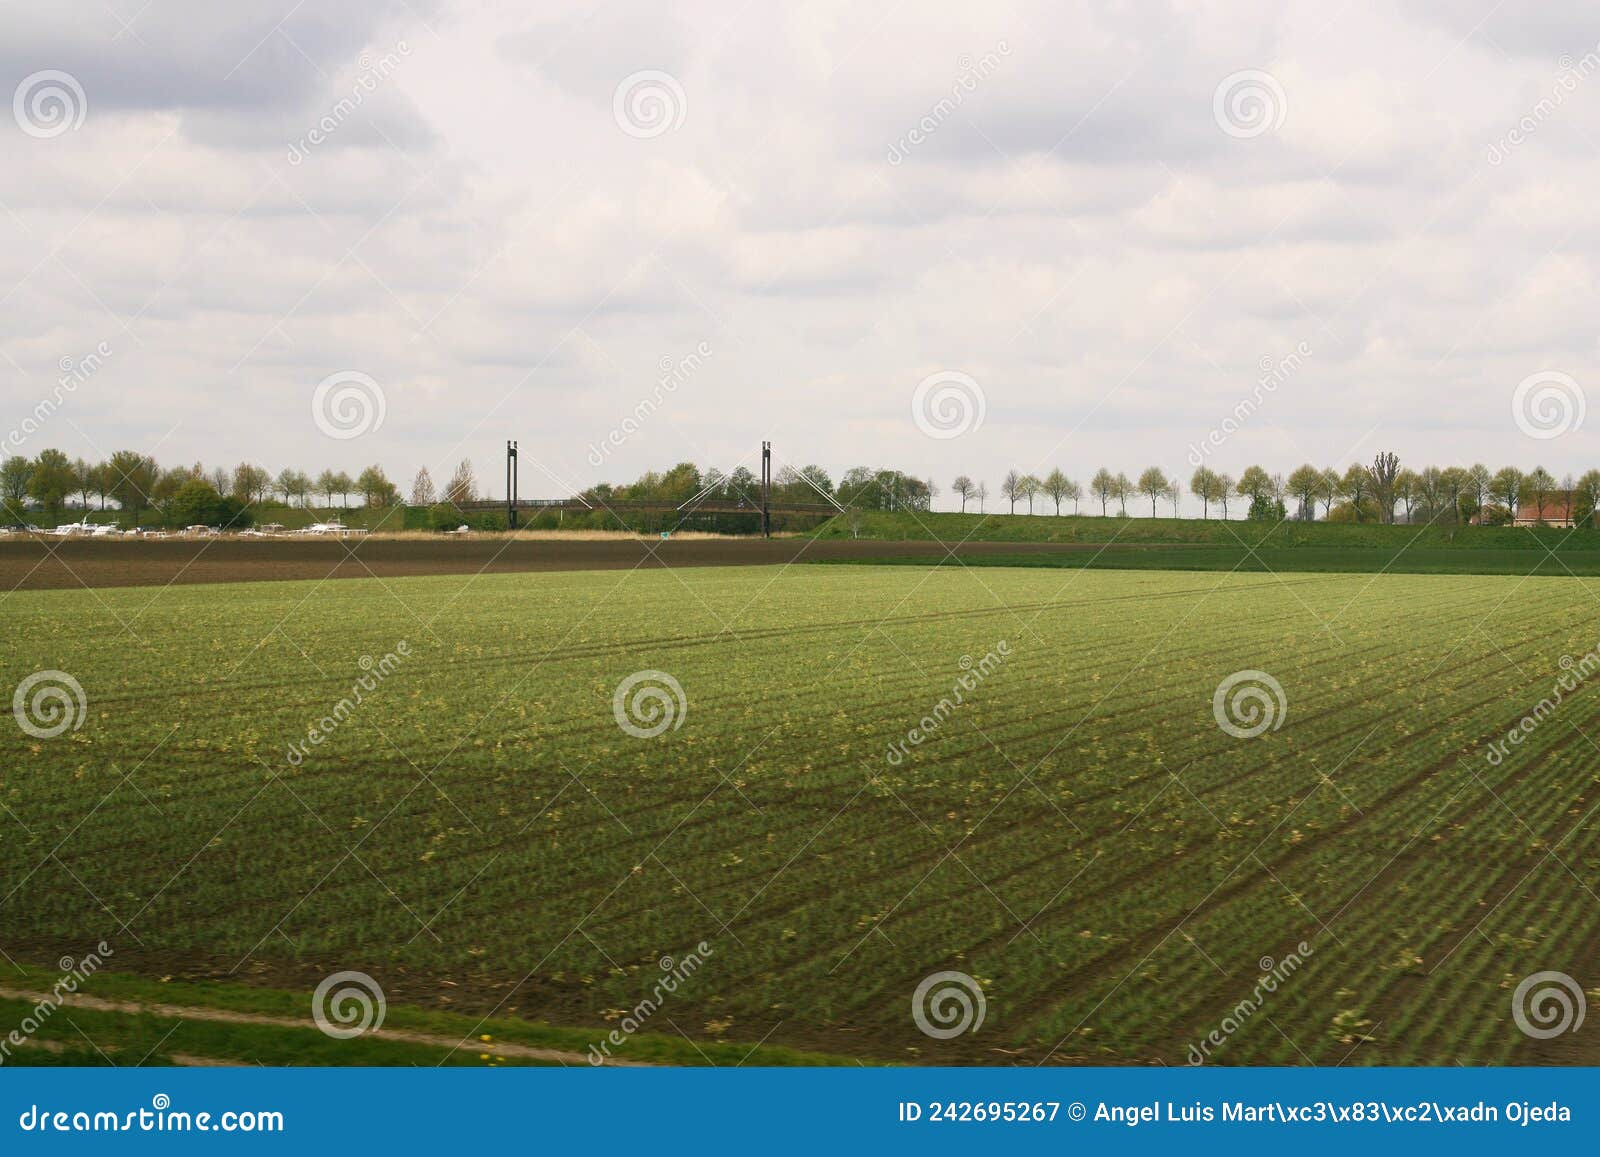 crop fields in rural areas of the netherlands.